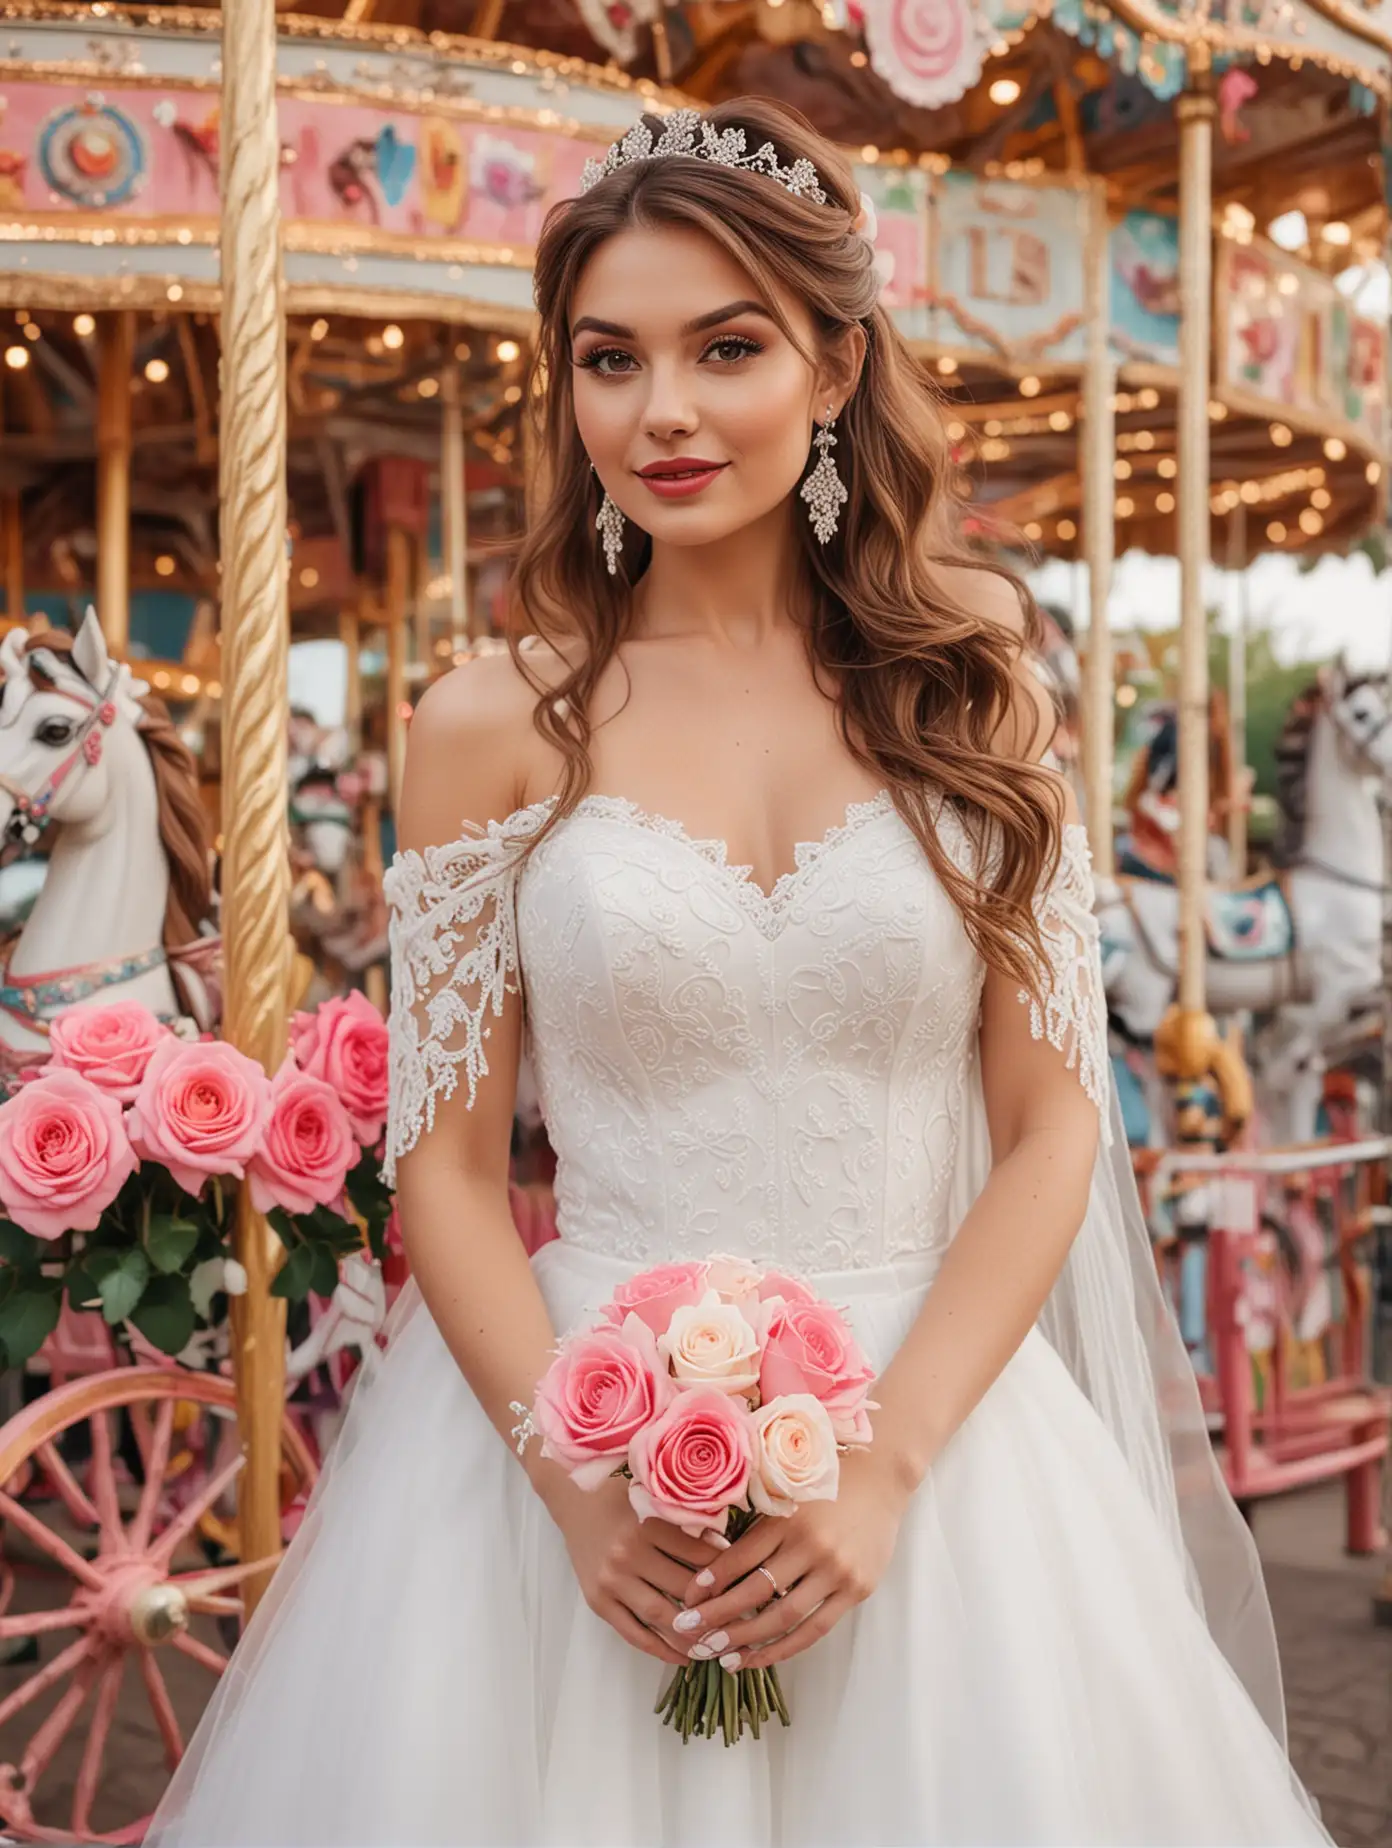 Elegant Bride with Roses Bouquet at Colorful Carousel Wedding Photoshoot